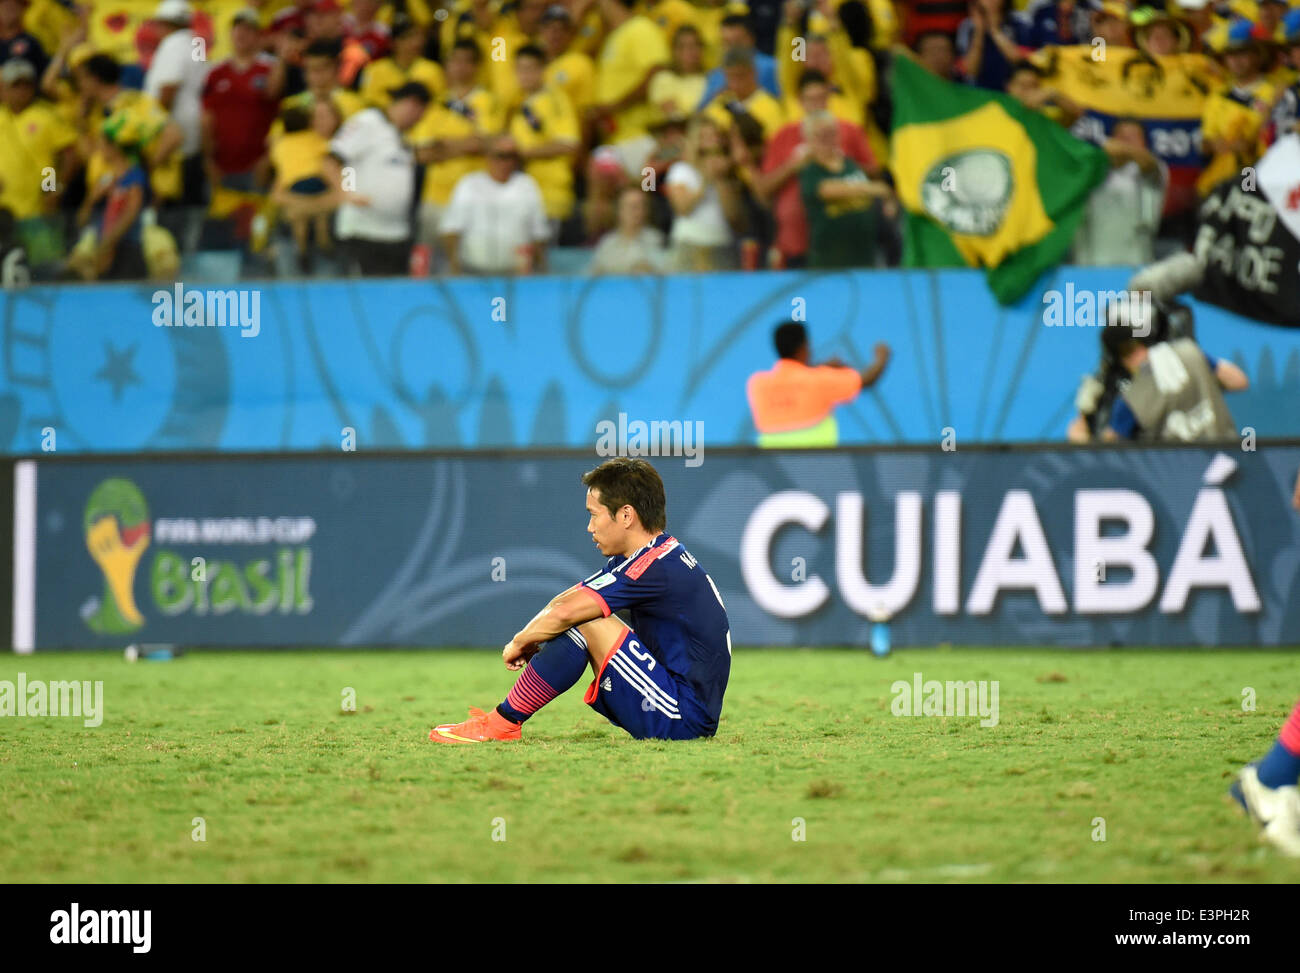 (140624) -- CUIABA, June 24, 2014 (Xinhua) -- Japan's Yuto Nagatomo reacts after a Group C match between Japan and Colombia of 2014 FIFA World Cup at the Arena Pantanal Stadium in Cuiaba, Brazil, June 24, 2014. Colombia won 4-1 over Japan on Tuesday.(Xinhua/Liu Dawei) Stock Photo